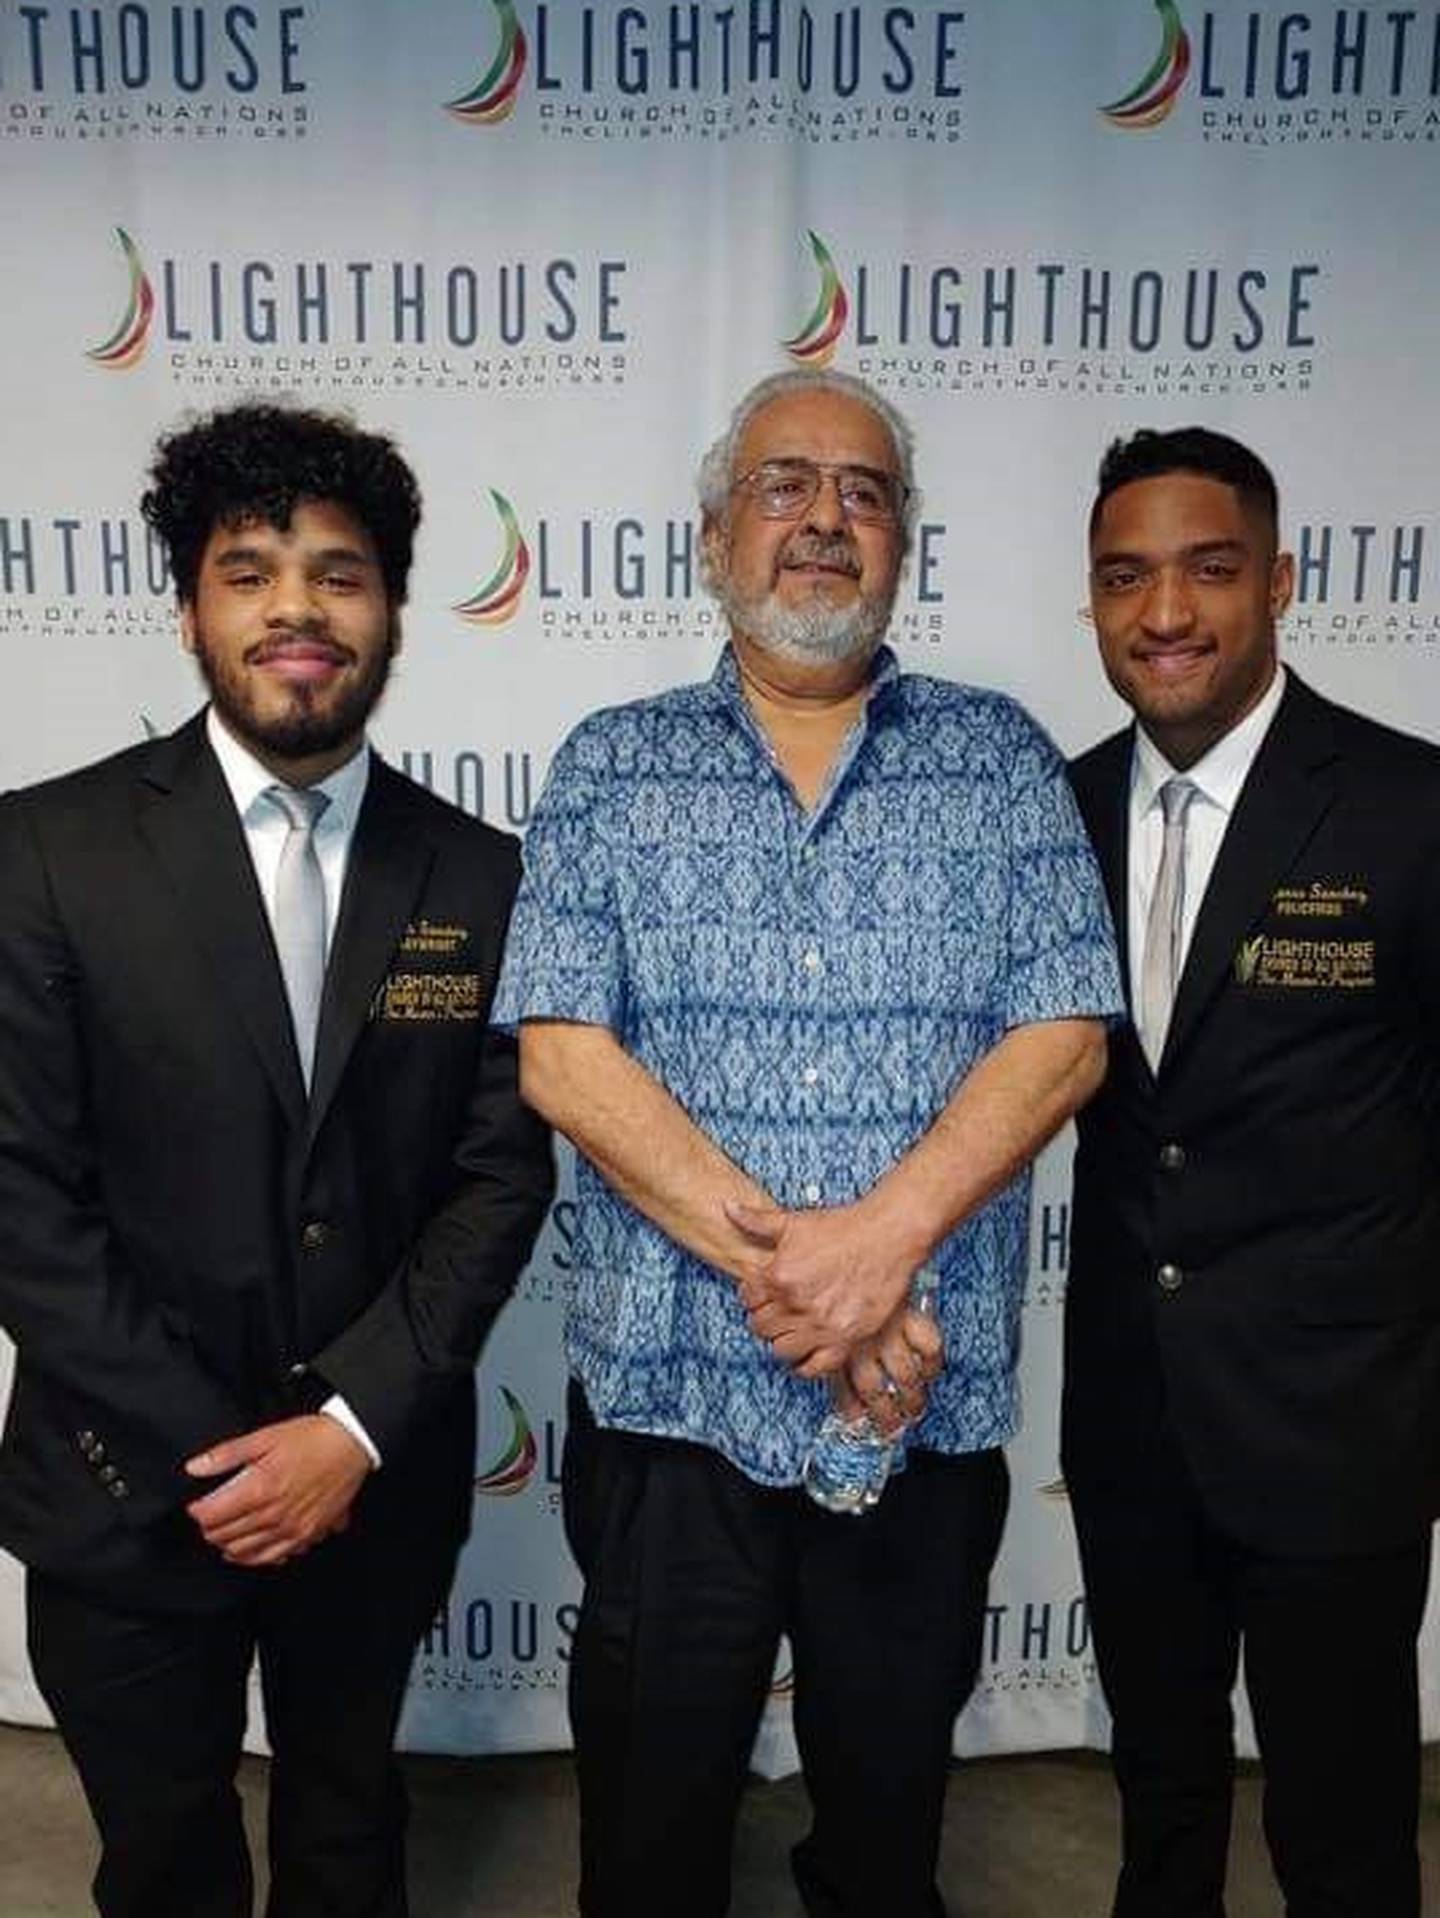 Robert Sanchez of Joliet was a karate teacher, third-degree black belt in karate, community advocate and staunch family man.  He is pictured with grandsons Isaiah Sanchez and Alfonso Sanchez.